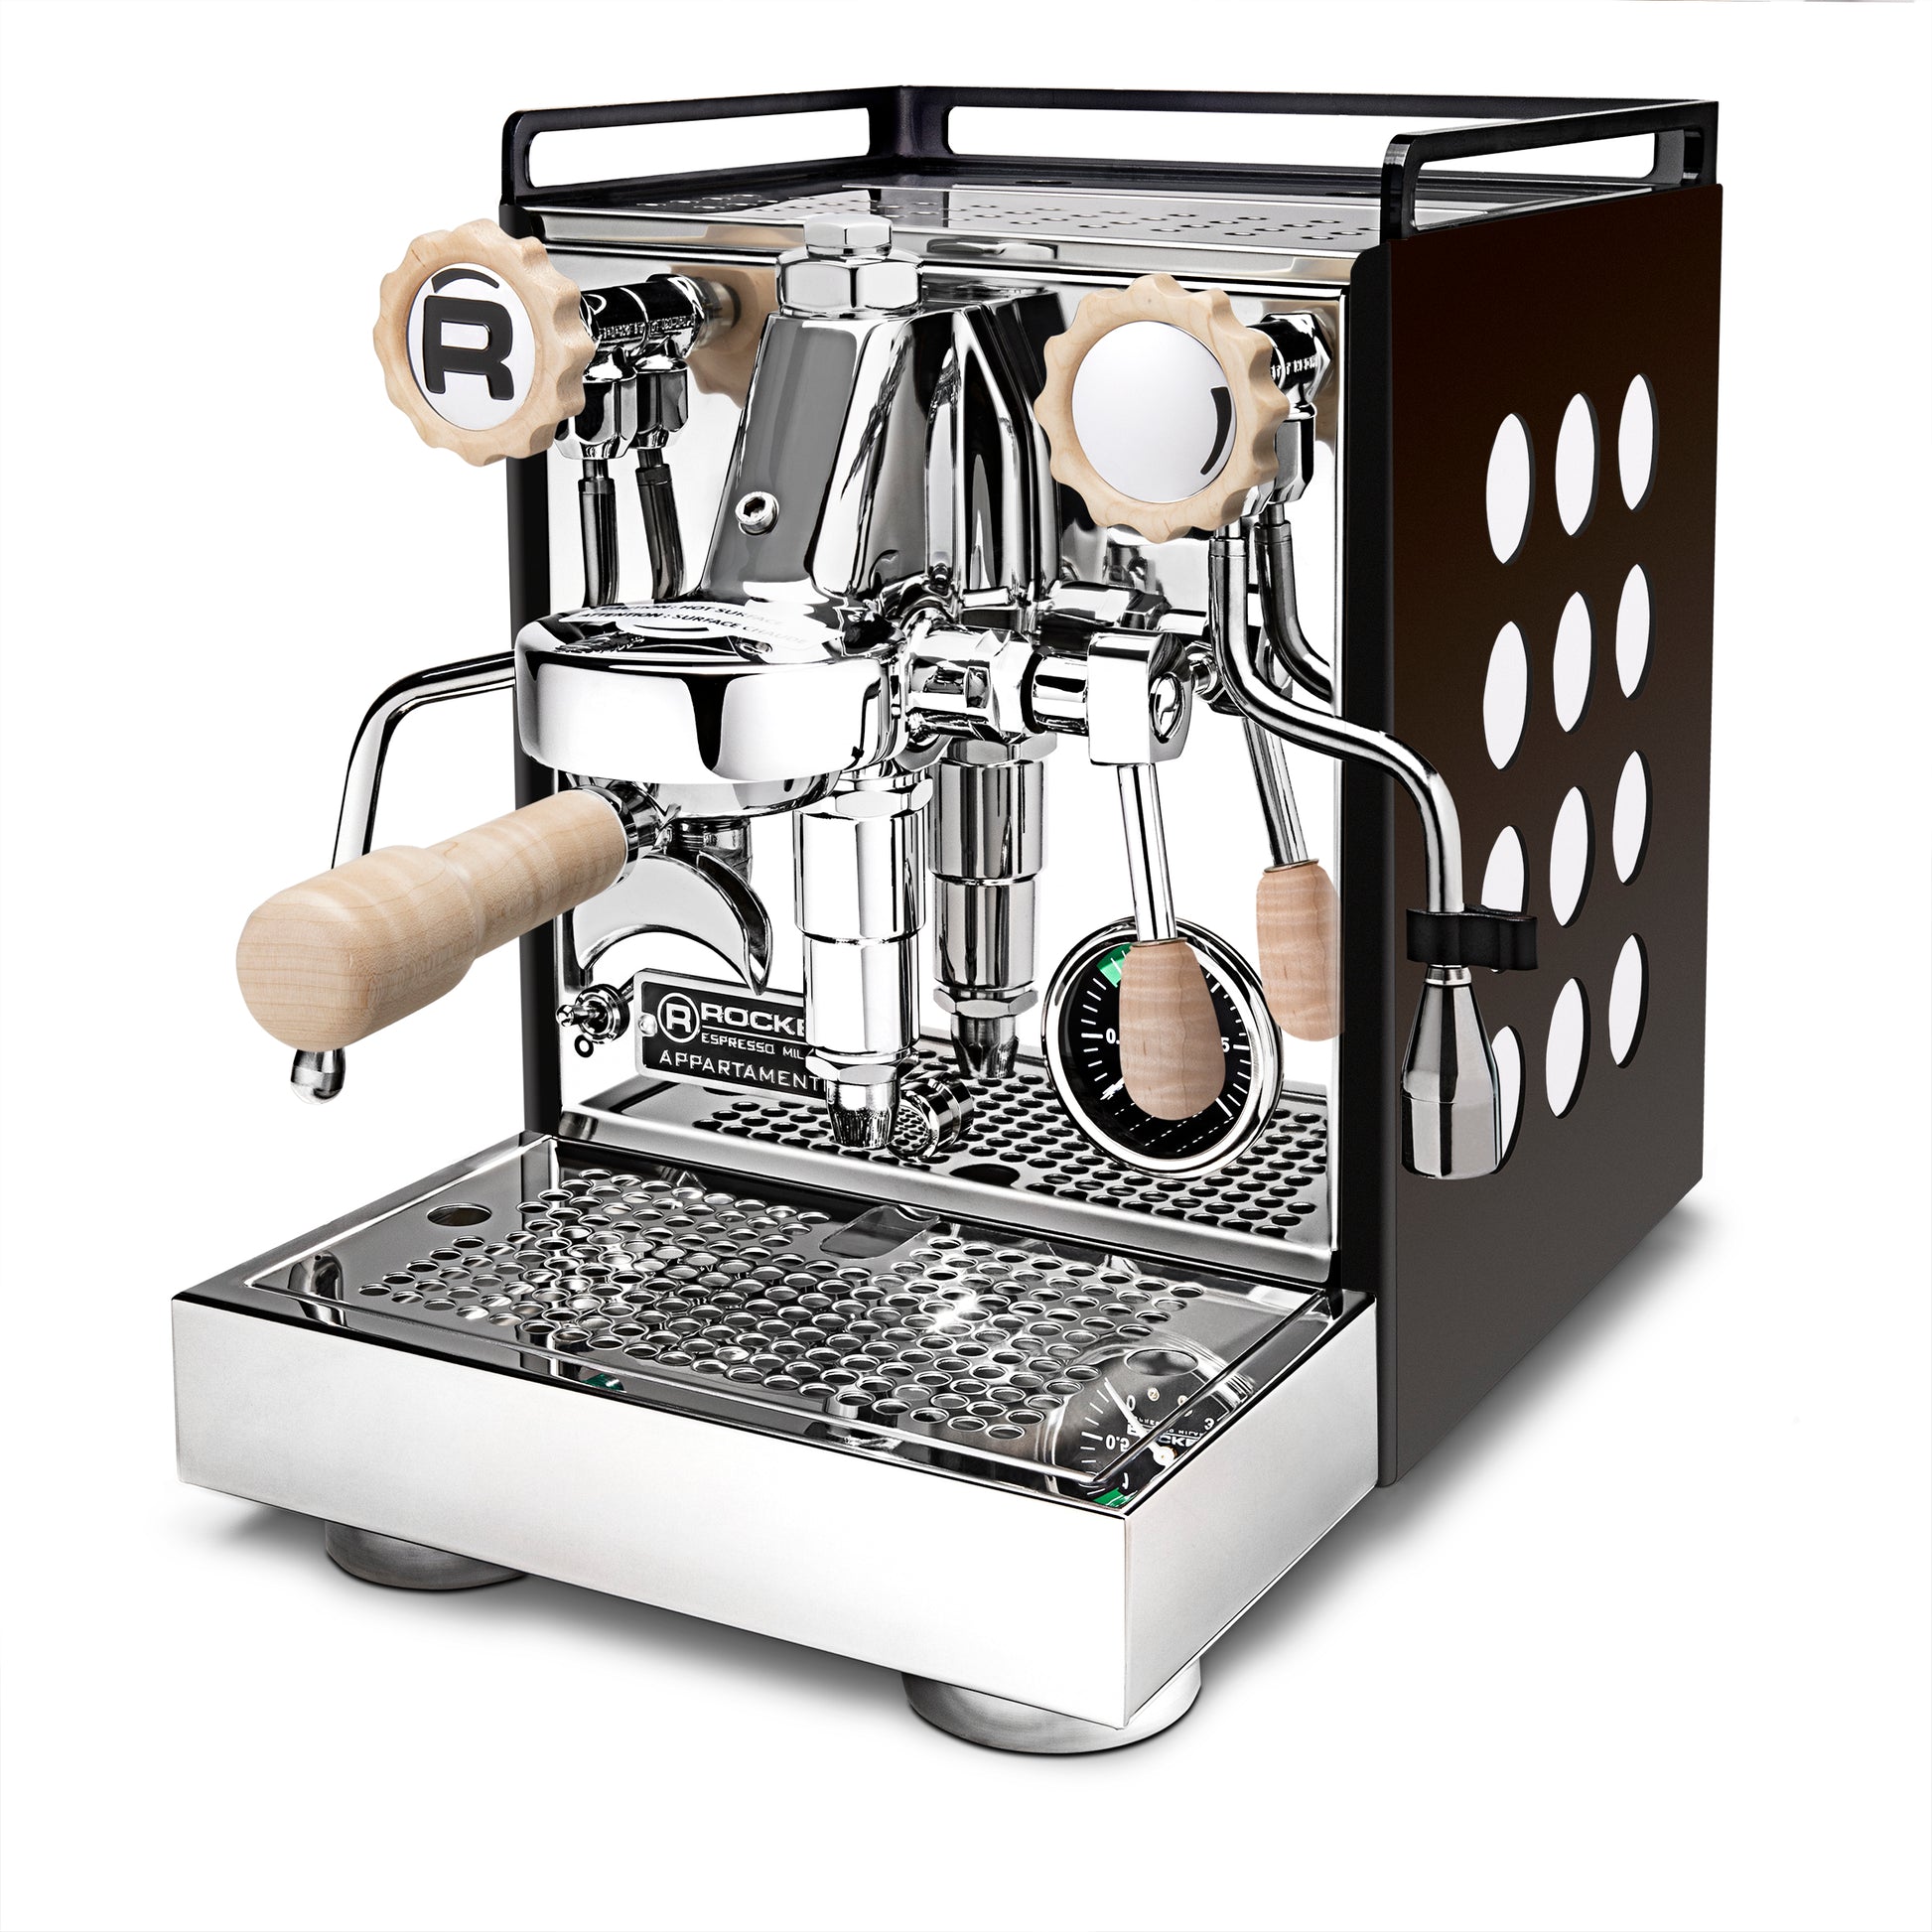 Another espresso machine from Neverland